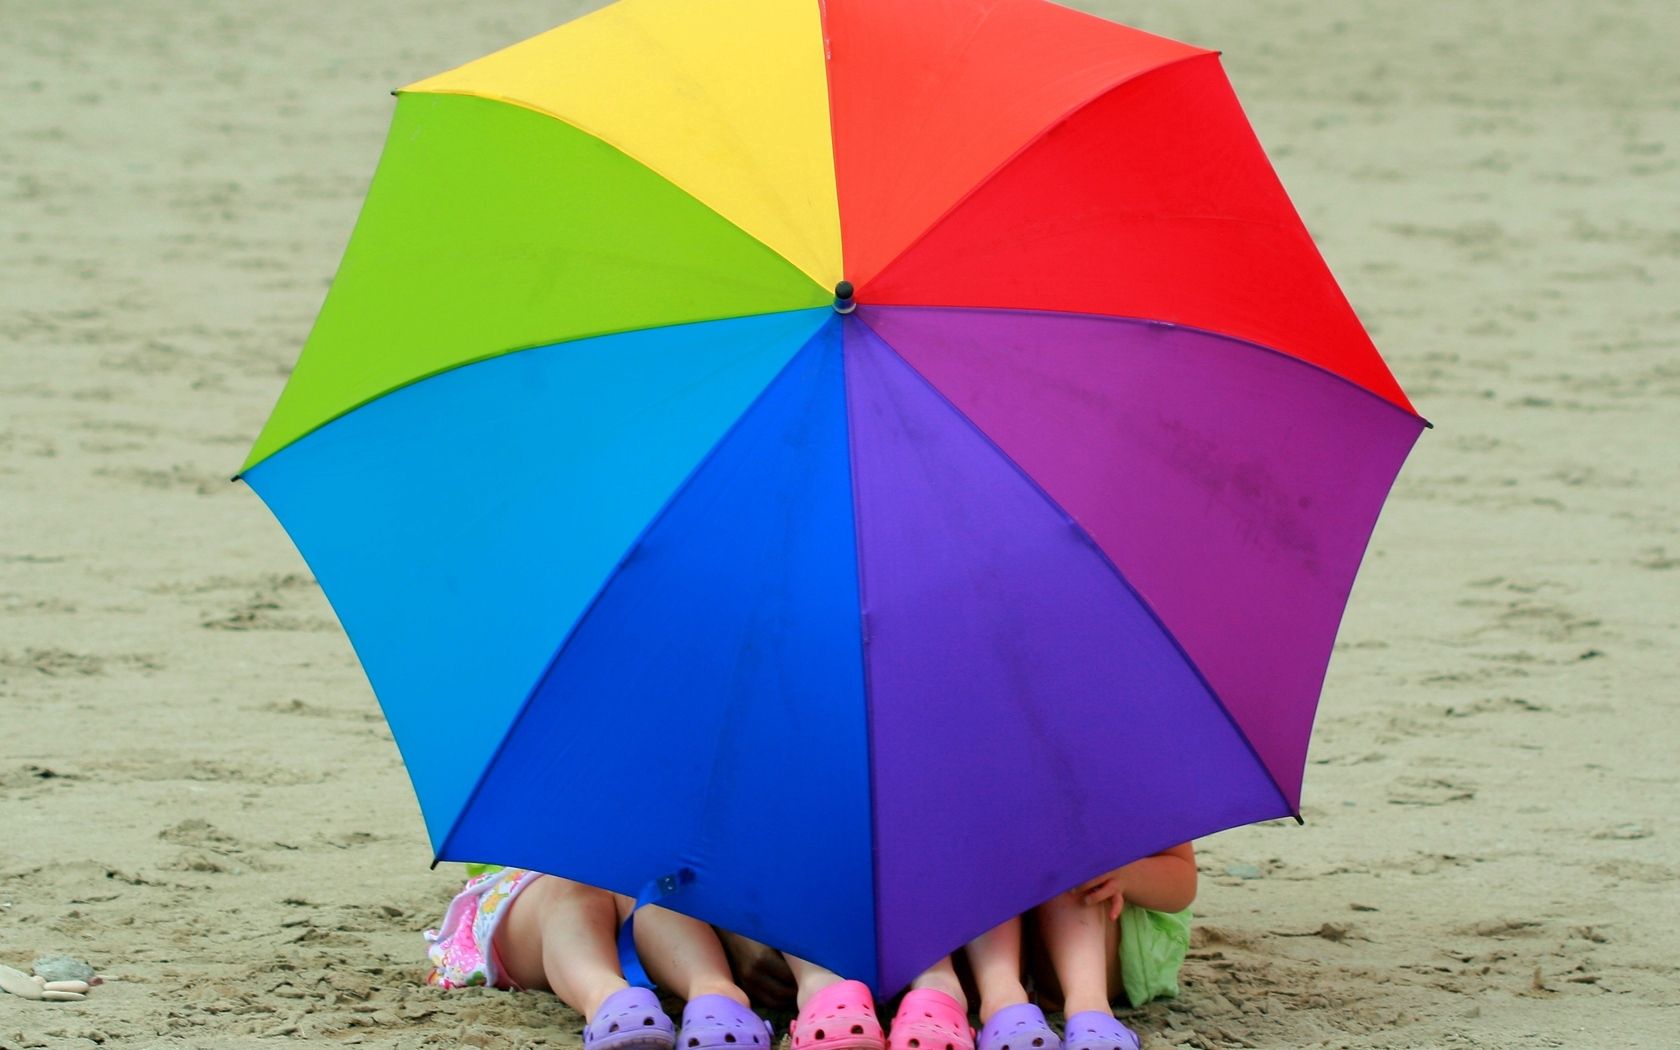 83053 download wallpaper children, girls, nature, beach, summer, miscellanea, miscellaneous, legs, color, umbrella, mood, child, coloured, moods, footwear screensavers and pictures for free